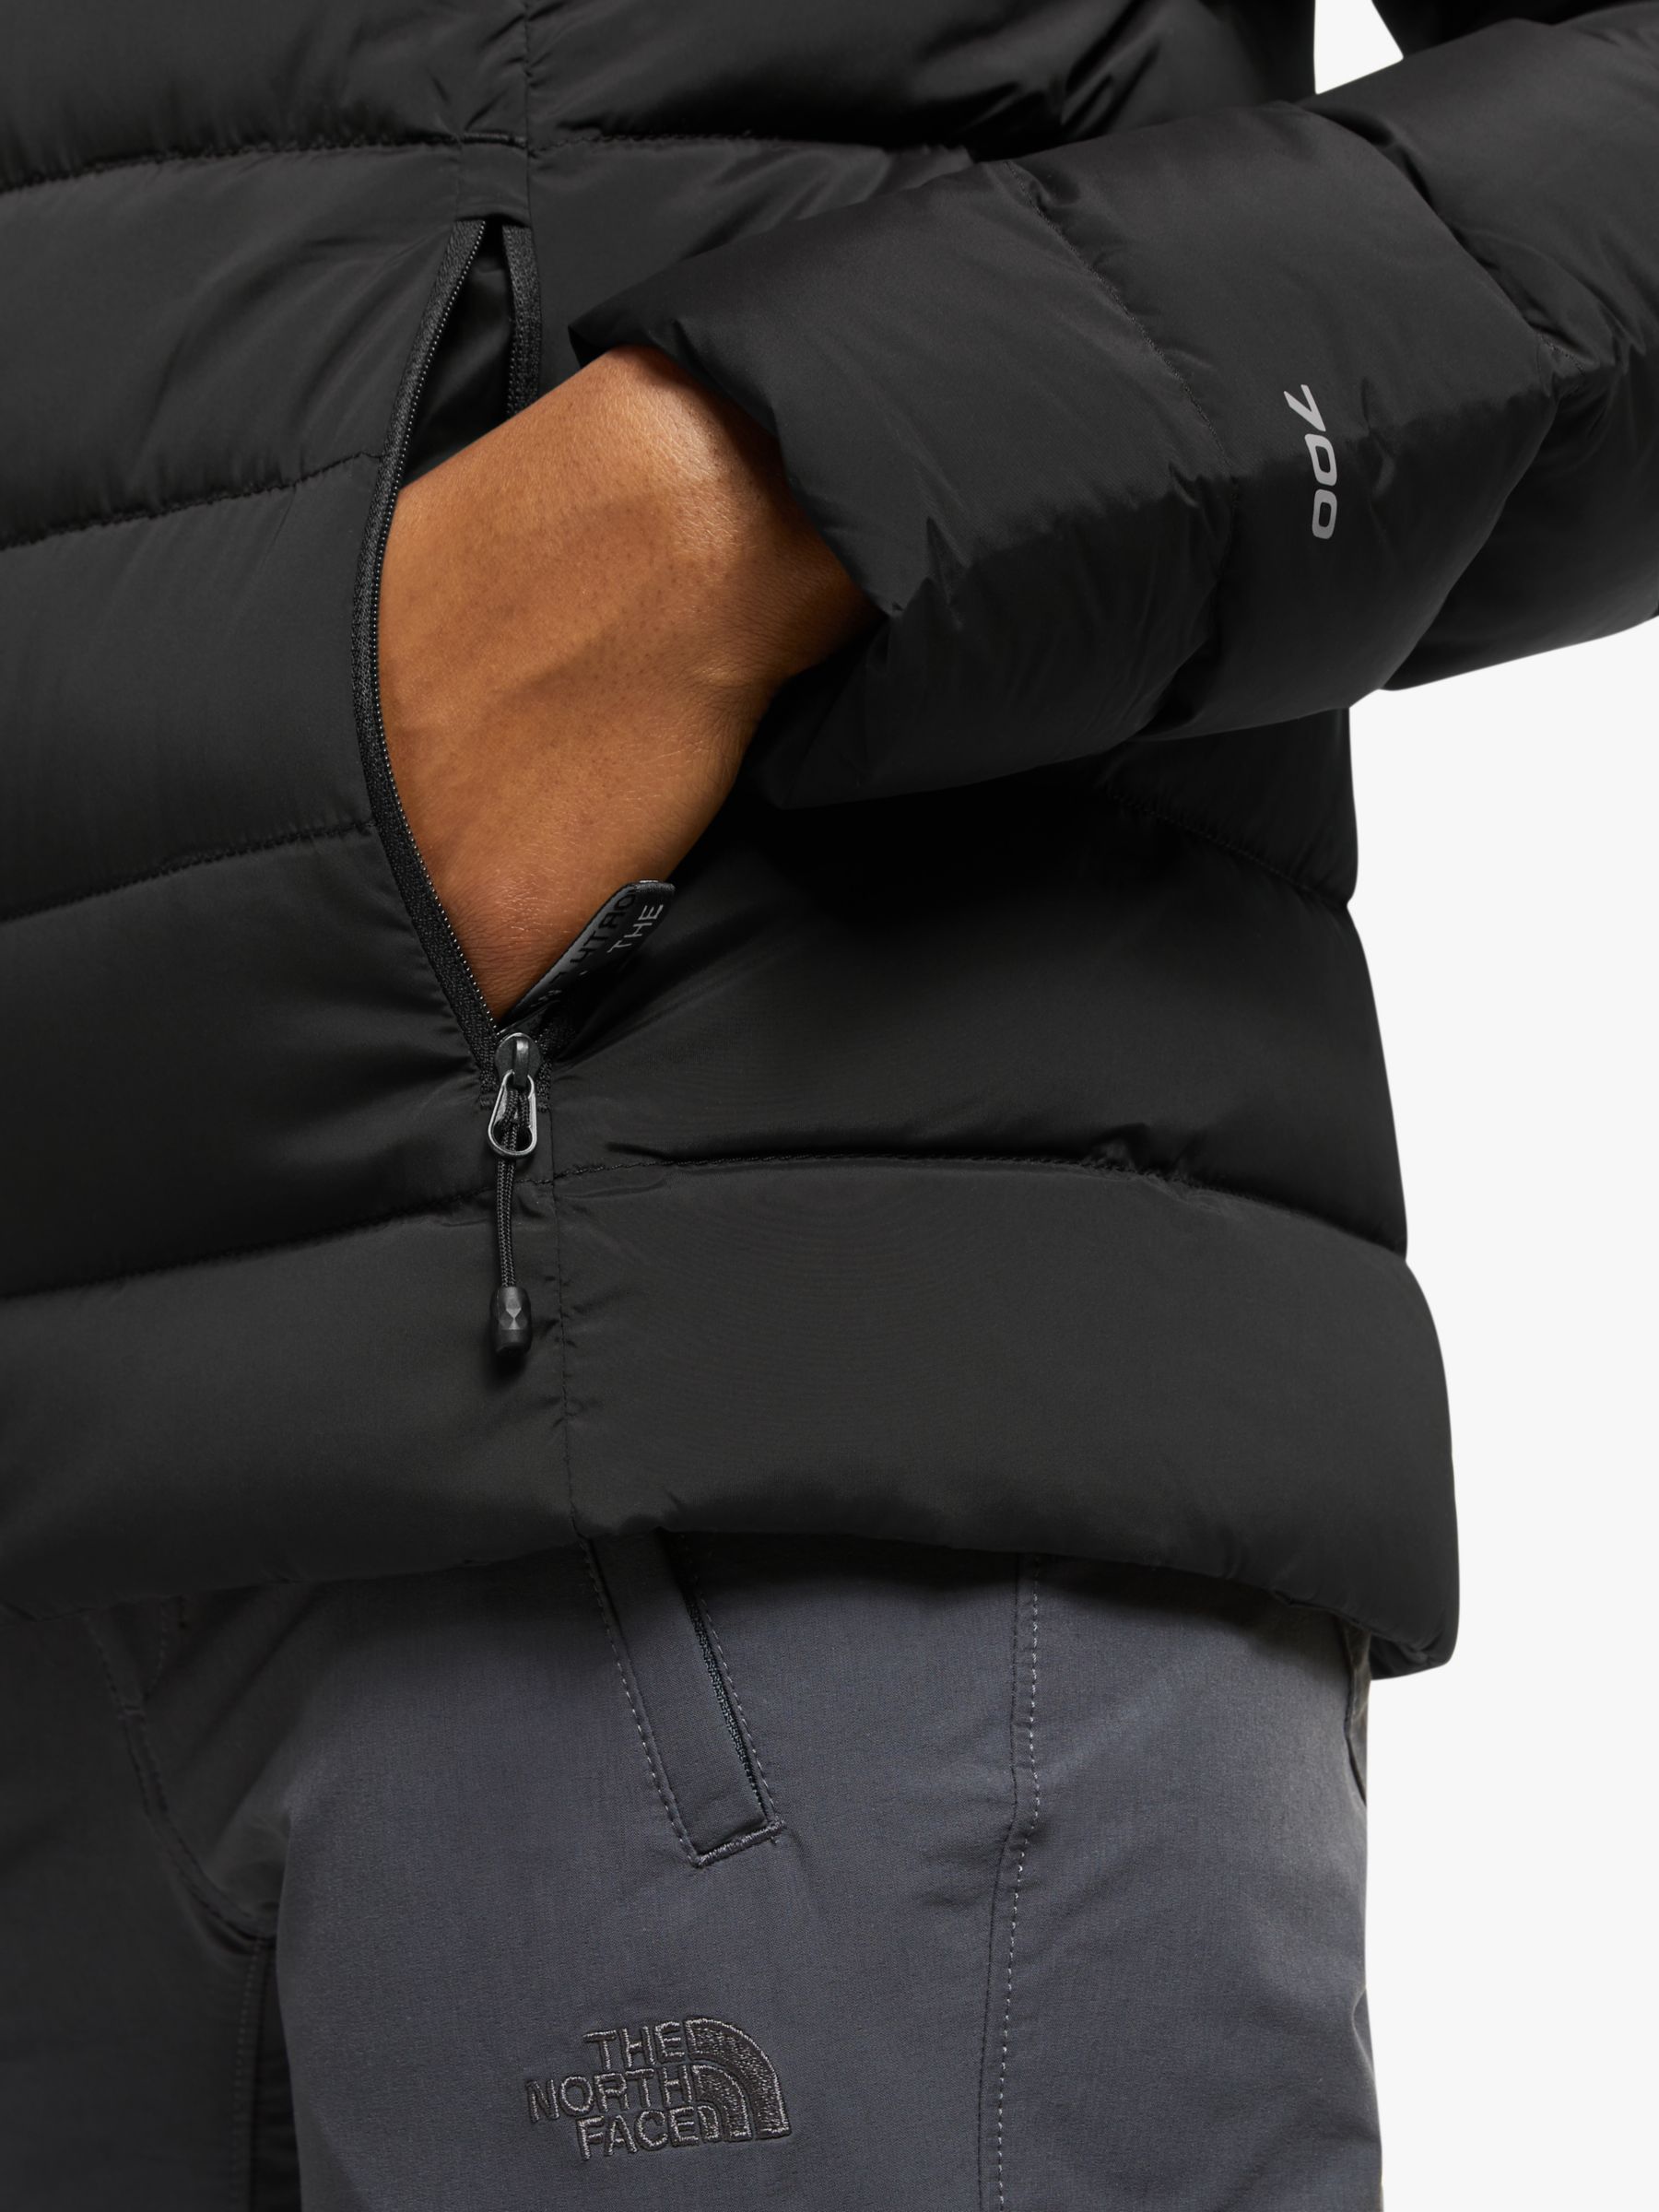 the north face jacket sale